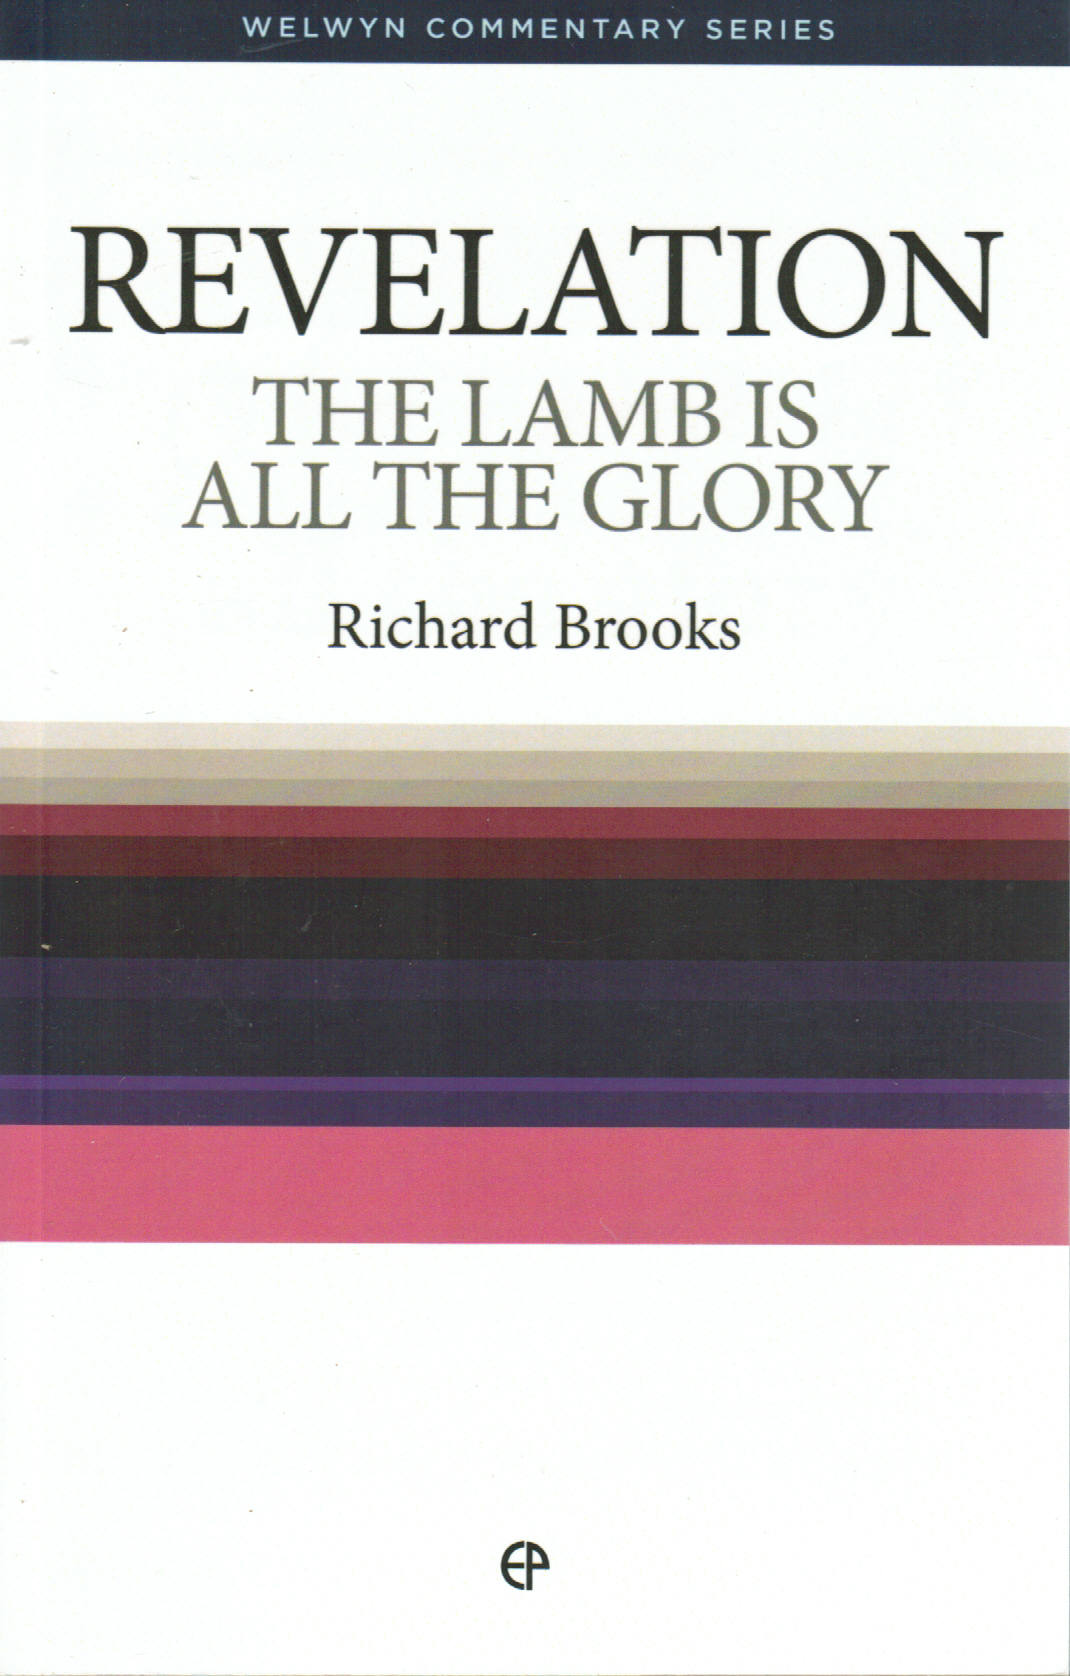 Welwyn Commentary Series - Revelation: The Lamb is All the Glory